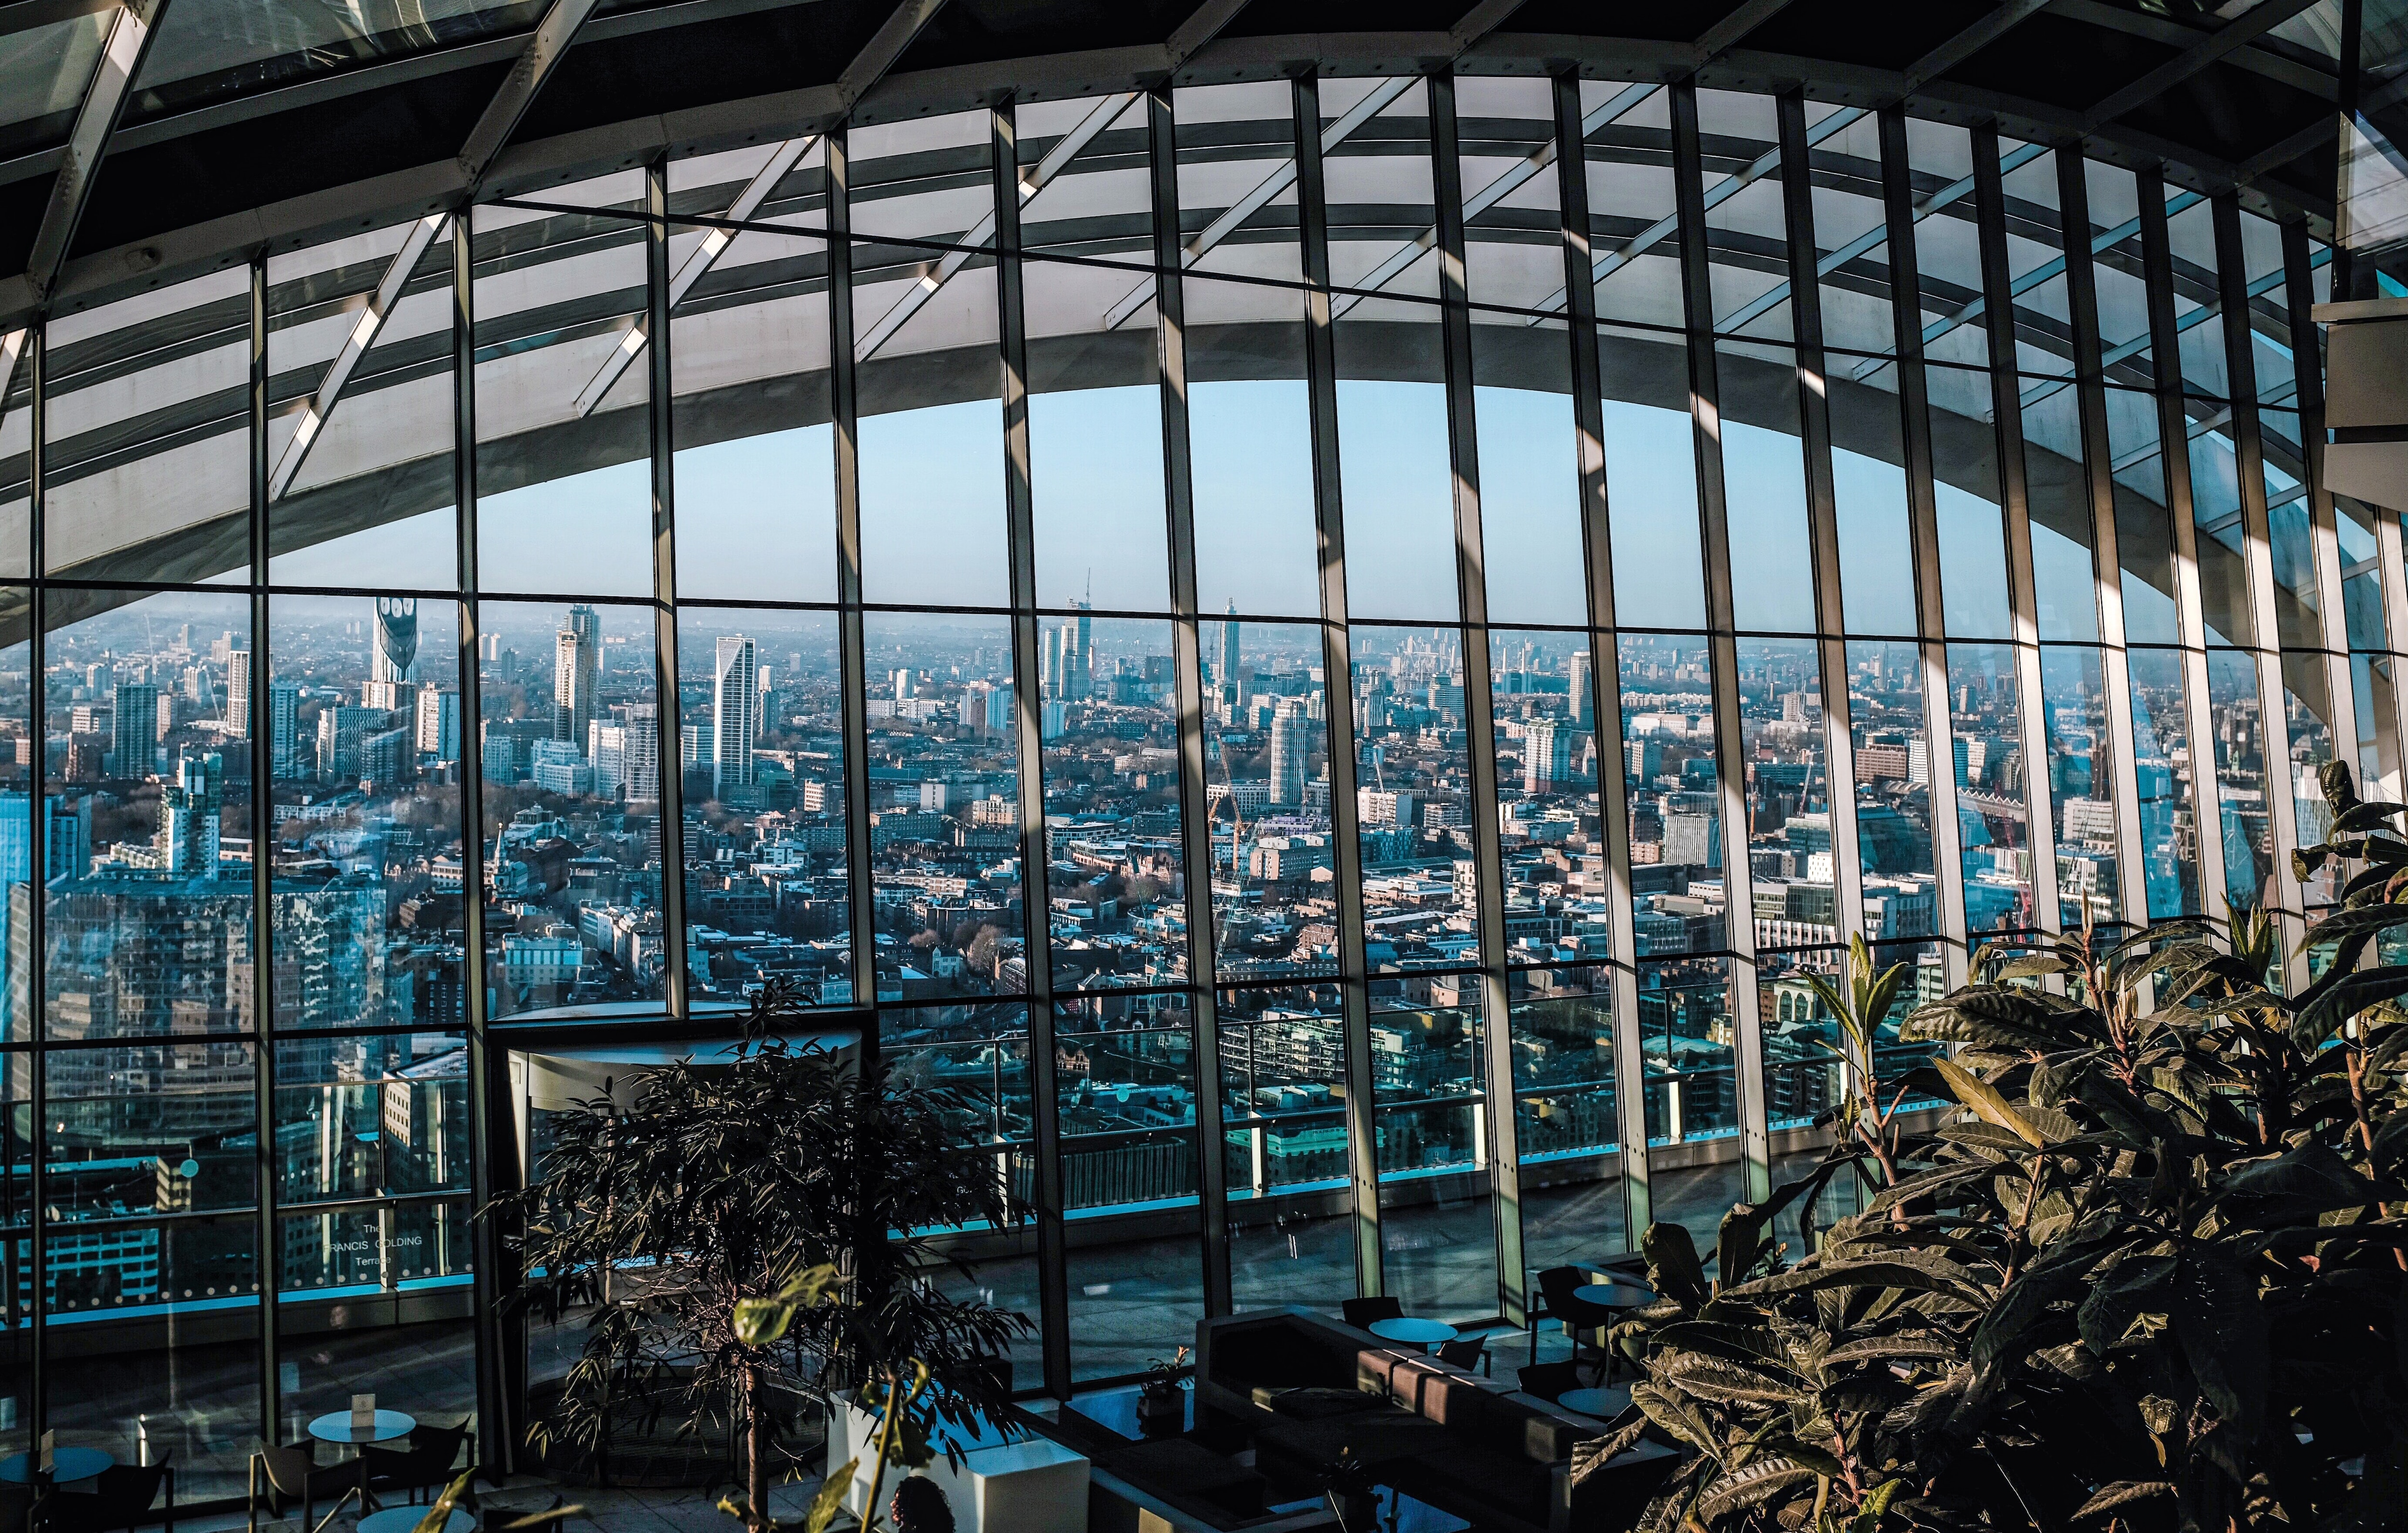 A number of the most popular restaurants and bars are located in Sky Garden.(Unsplash)